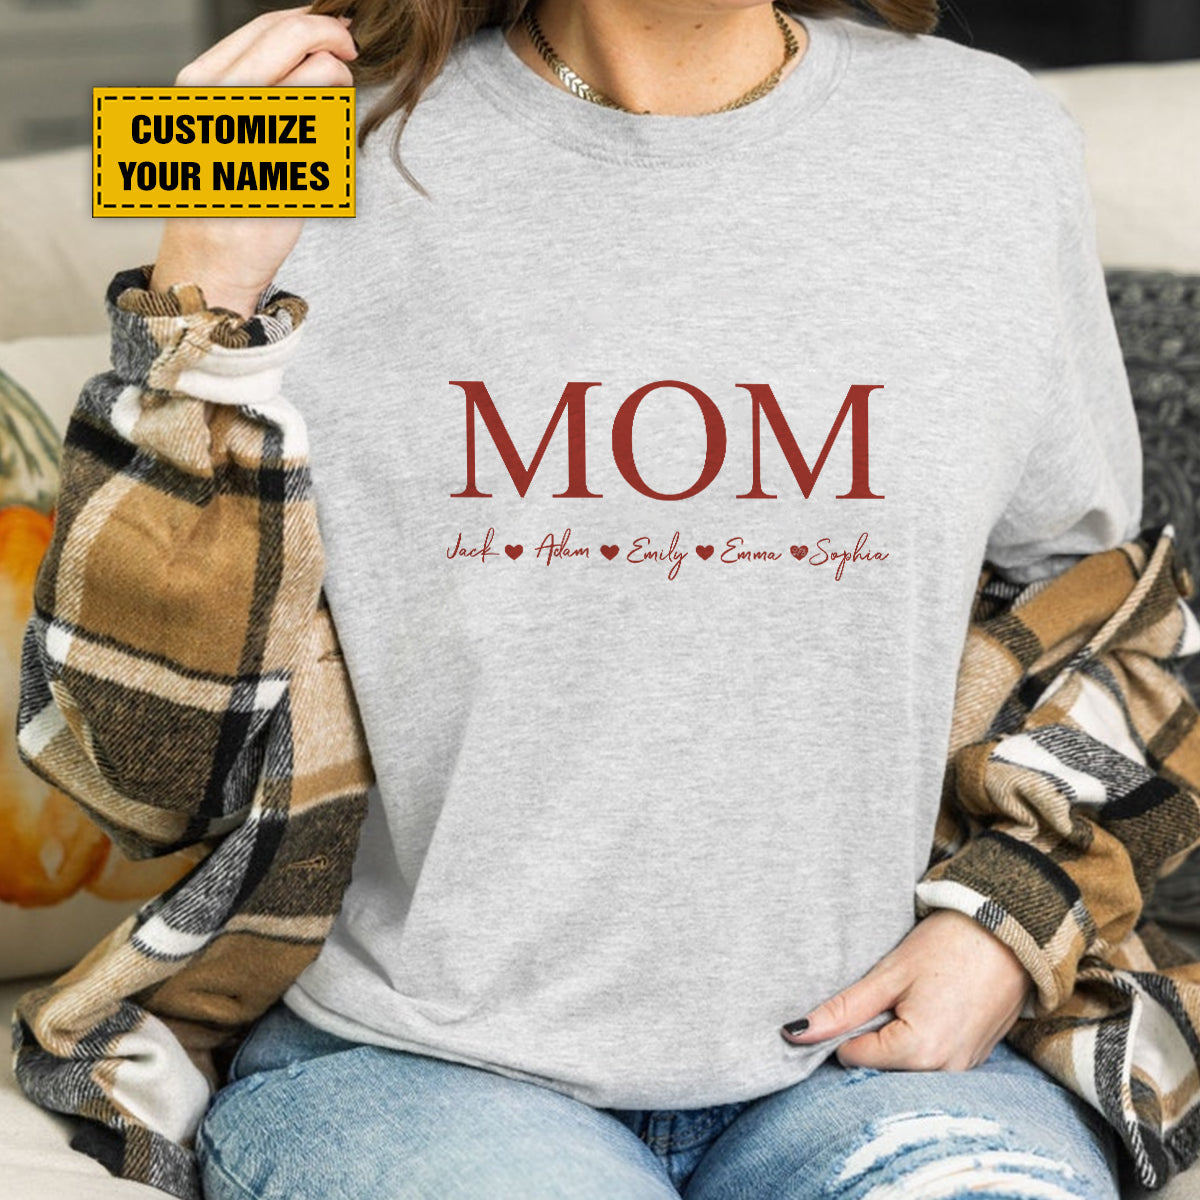 Teesdily | Mom Customized Kid Name Shirt, Mom Minimalist Style Hoodie Sweatshirt Mug, Mothers Day Gift From Son Daughter, Personalized Gifts